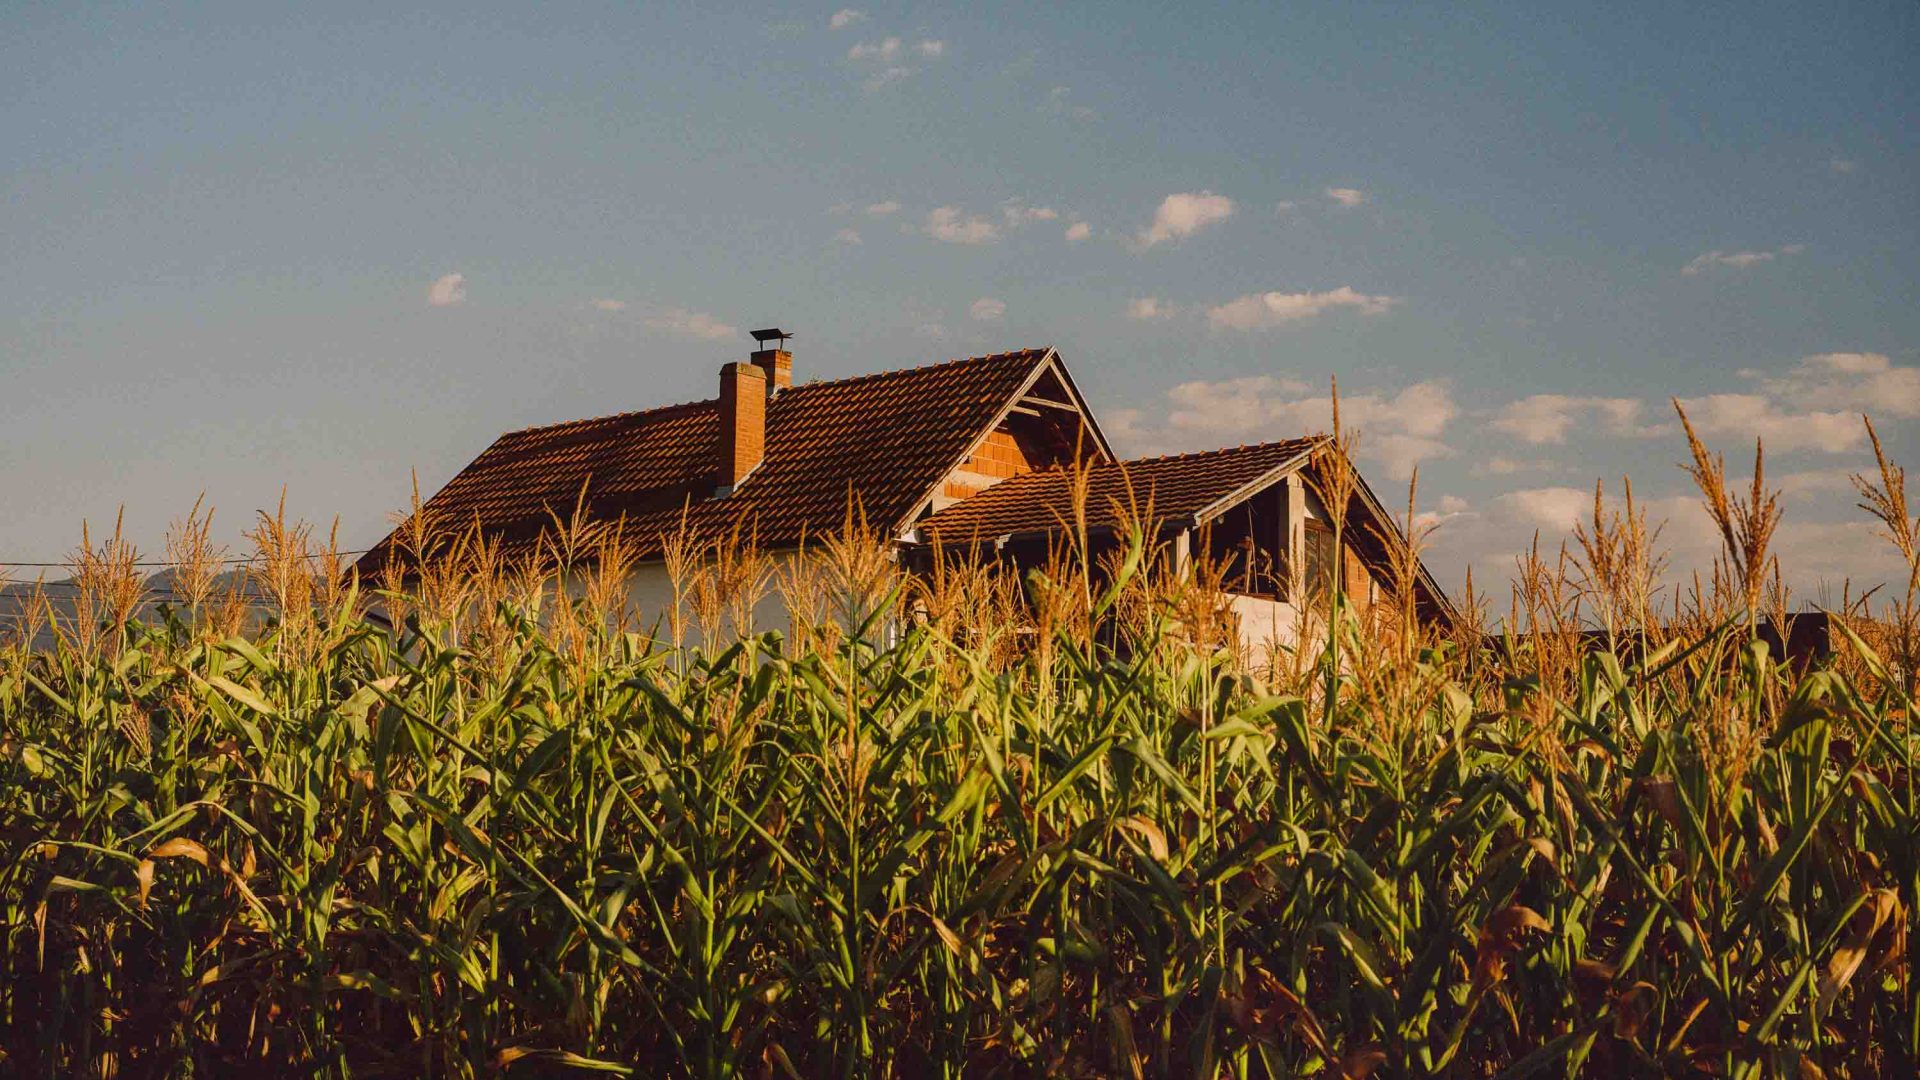 The top of a house is visible above a line of high growing crops.